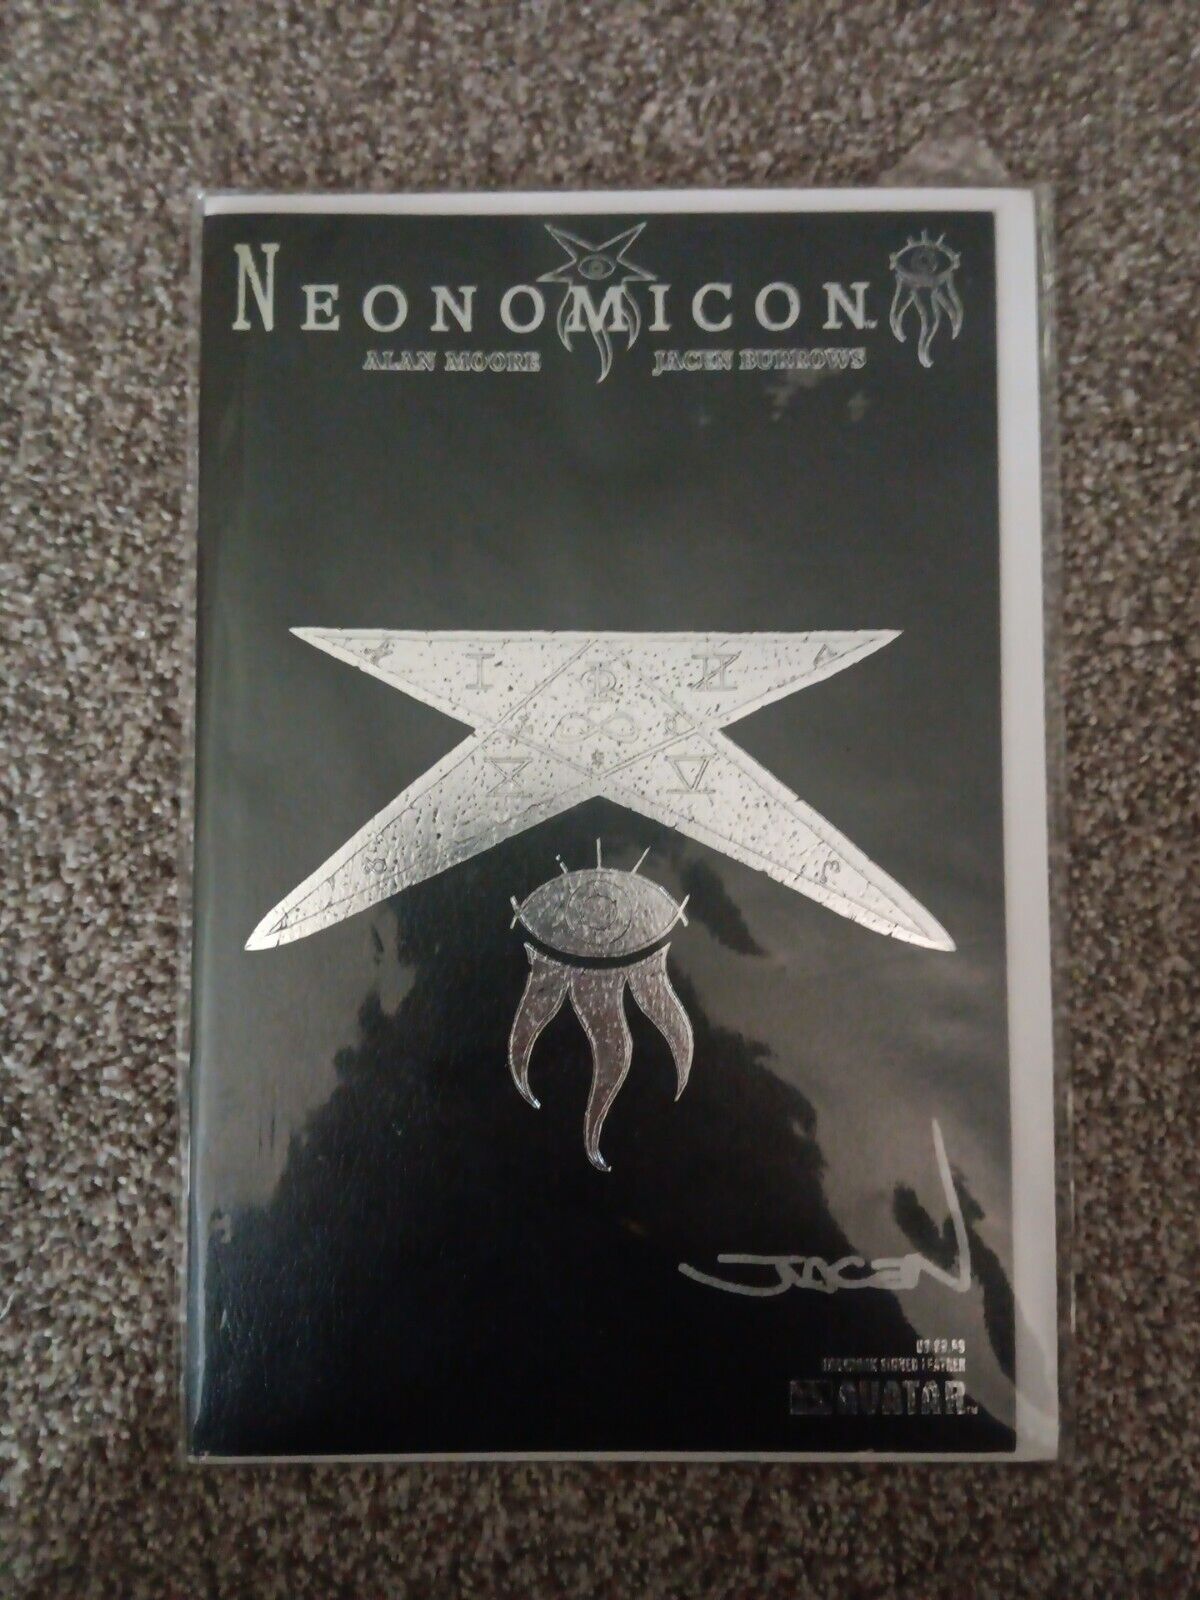 Alan Moore's Neonomicon Collected (Avatar Press, September 2011)